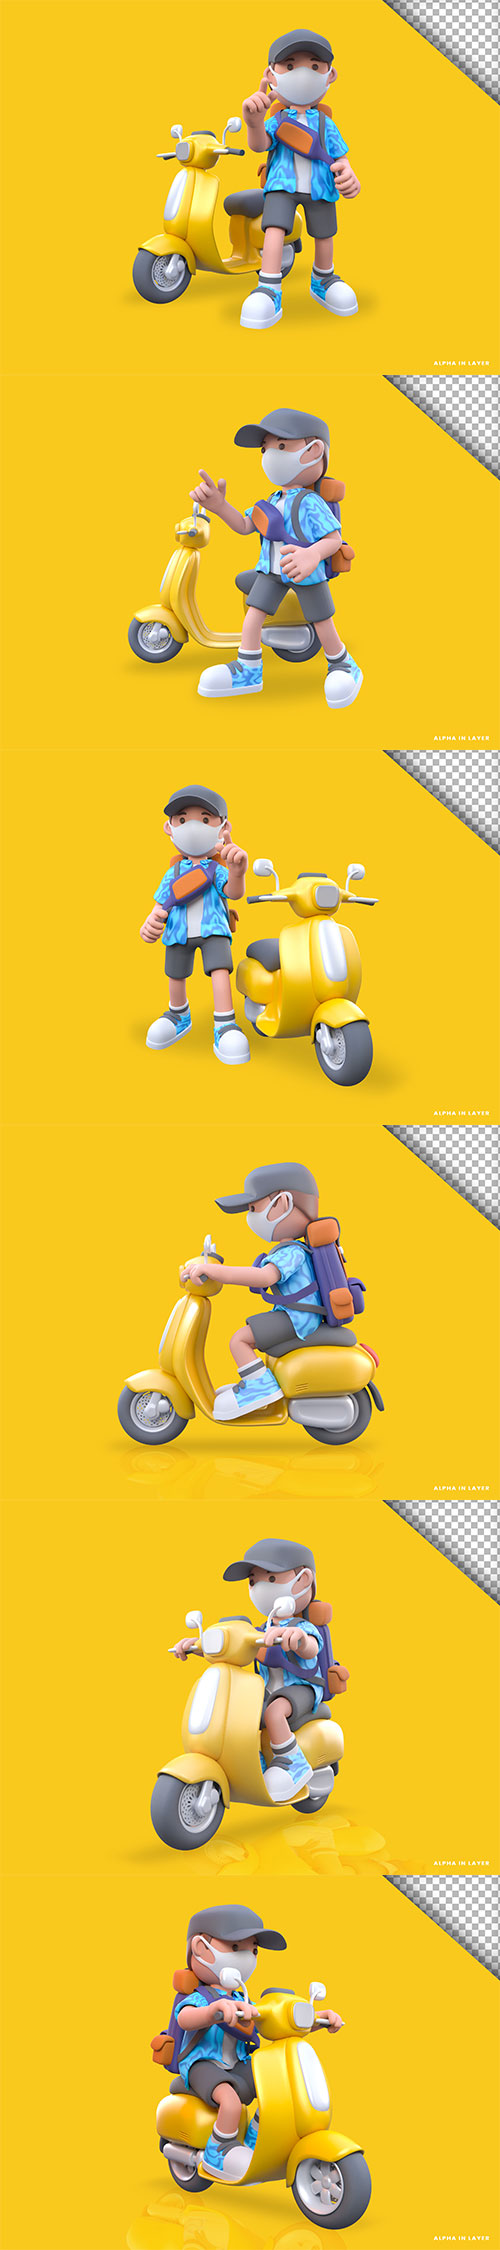 Boy ready to travel 3d rendering illustration Psd